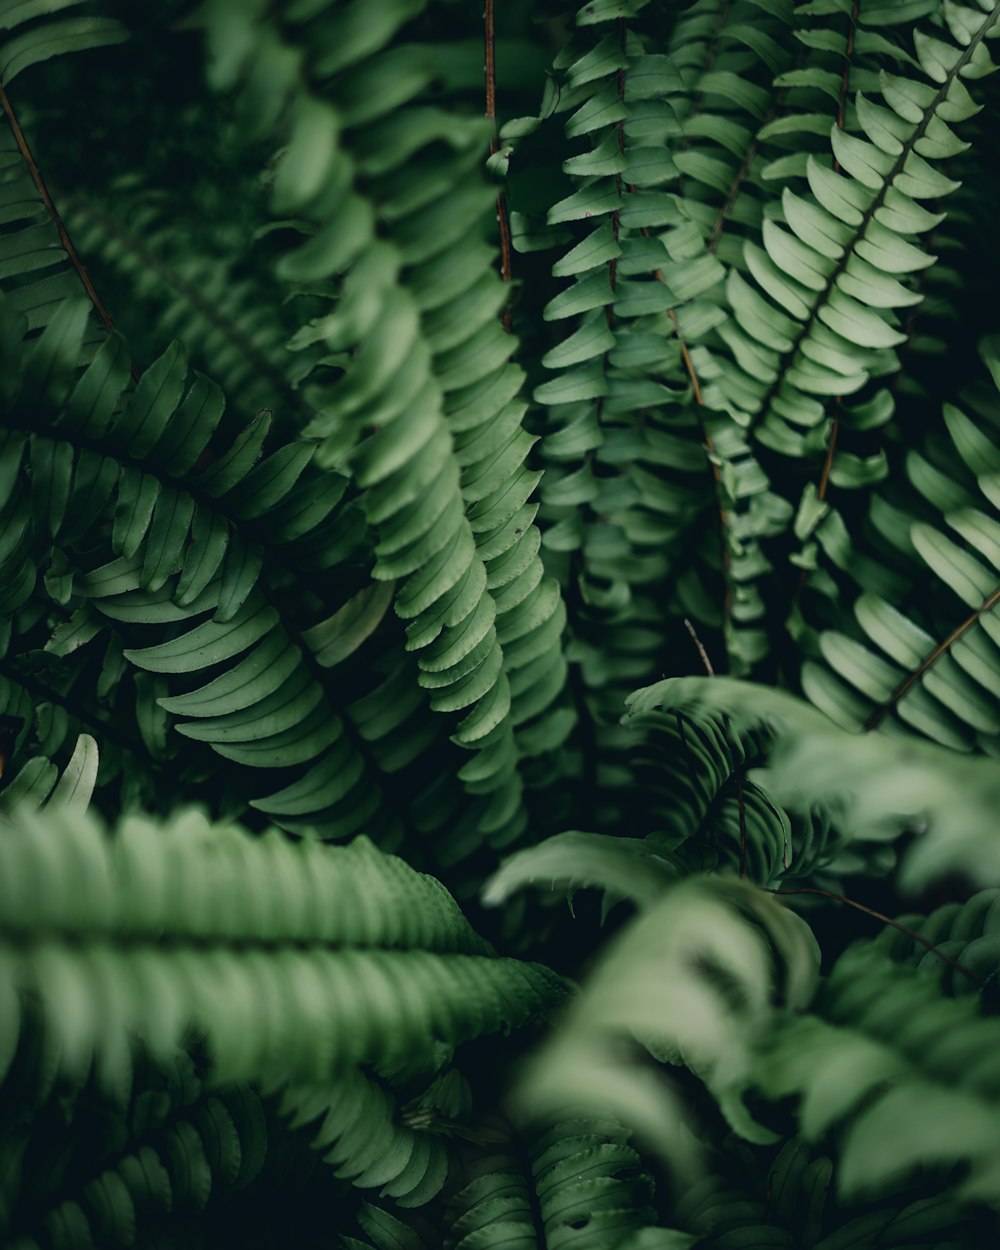 green fern plant in close-up photo